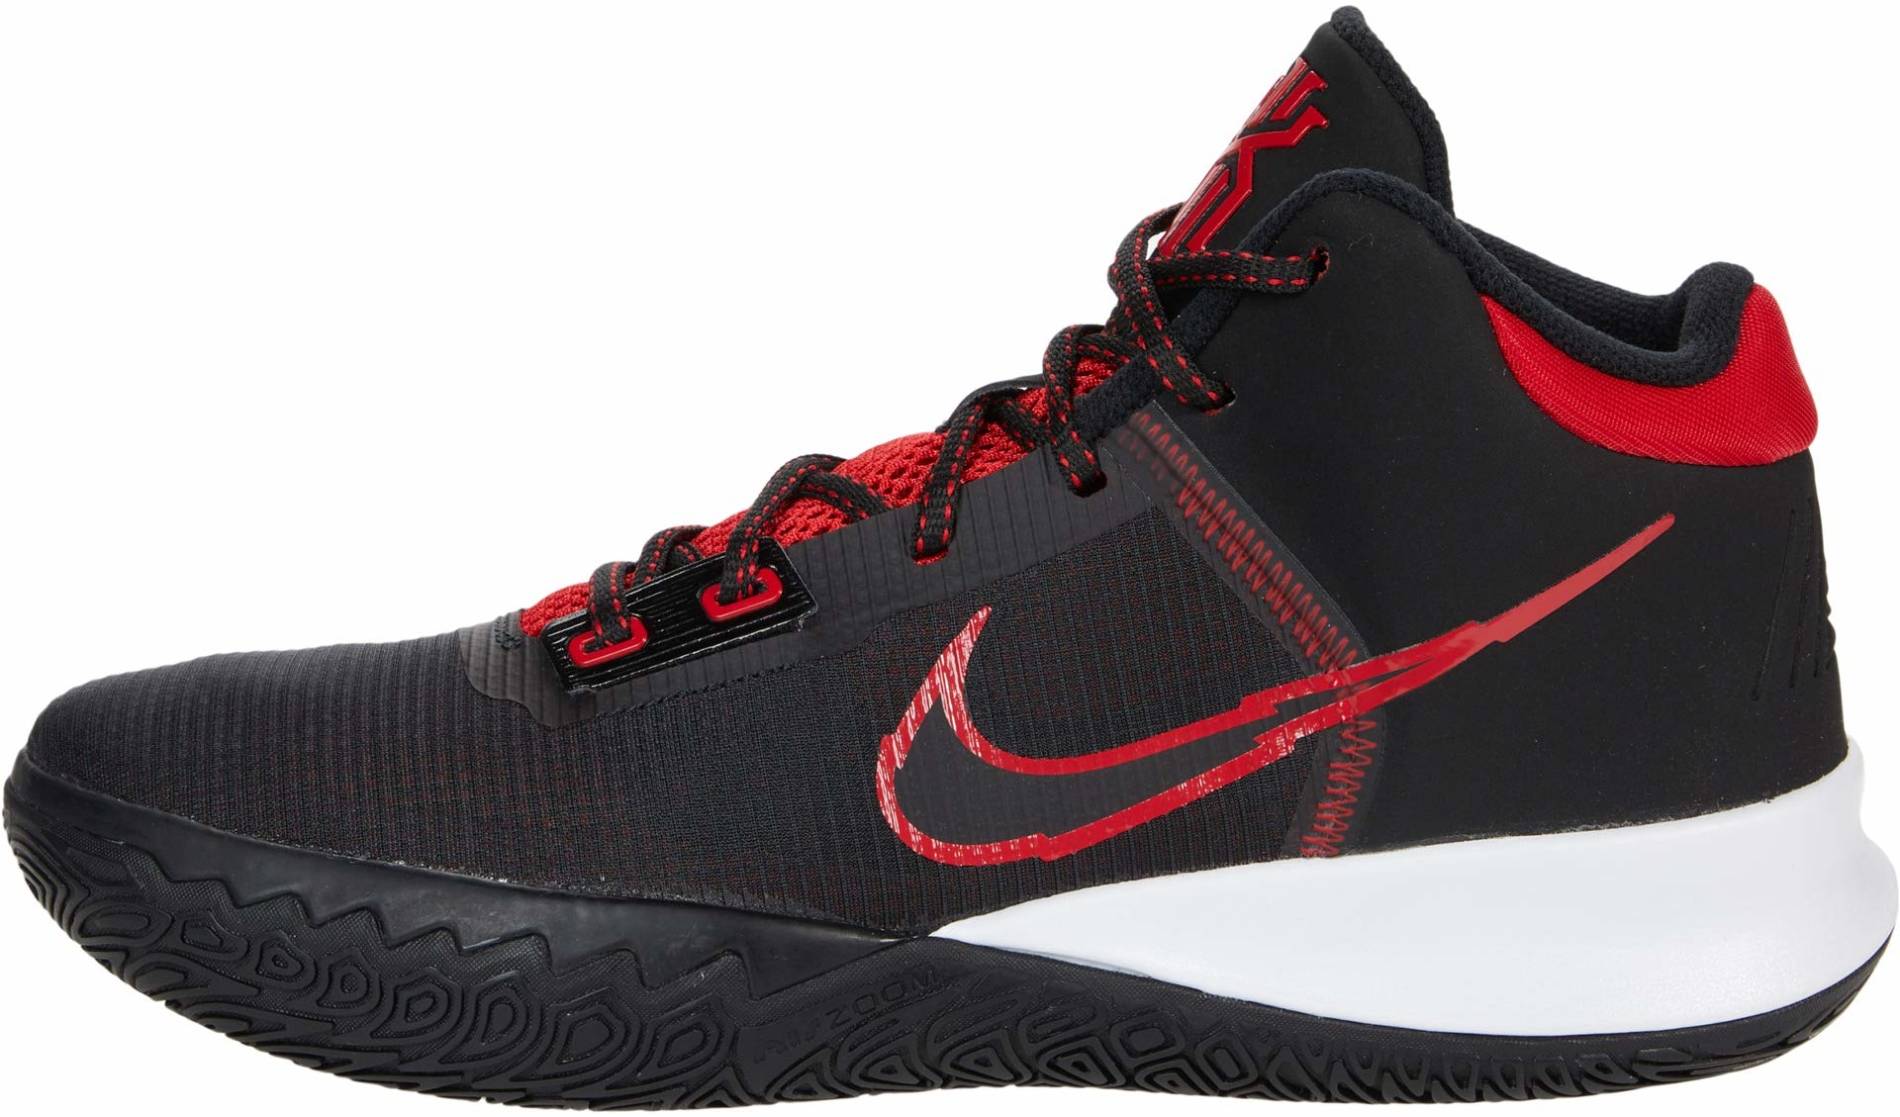 kyrie irving shoes red black